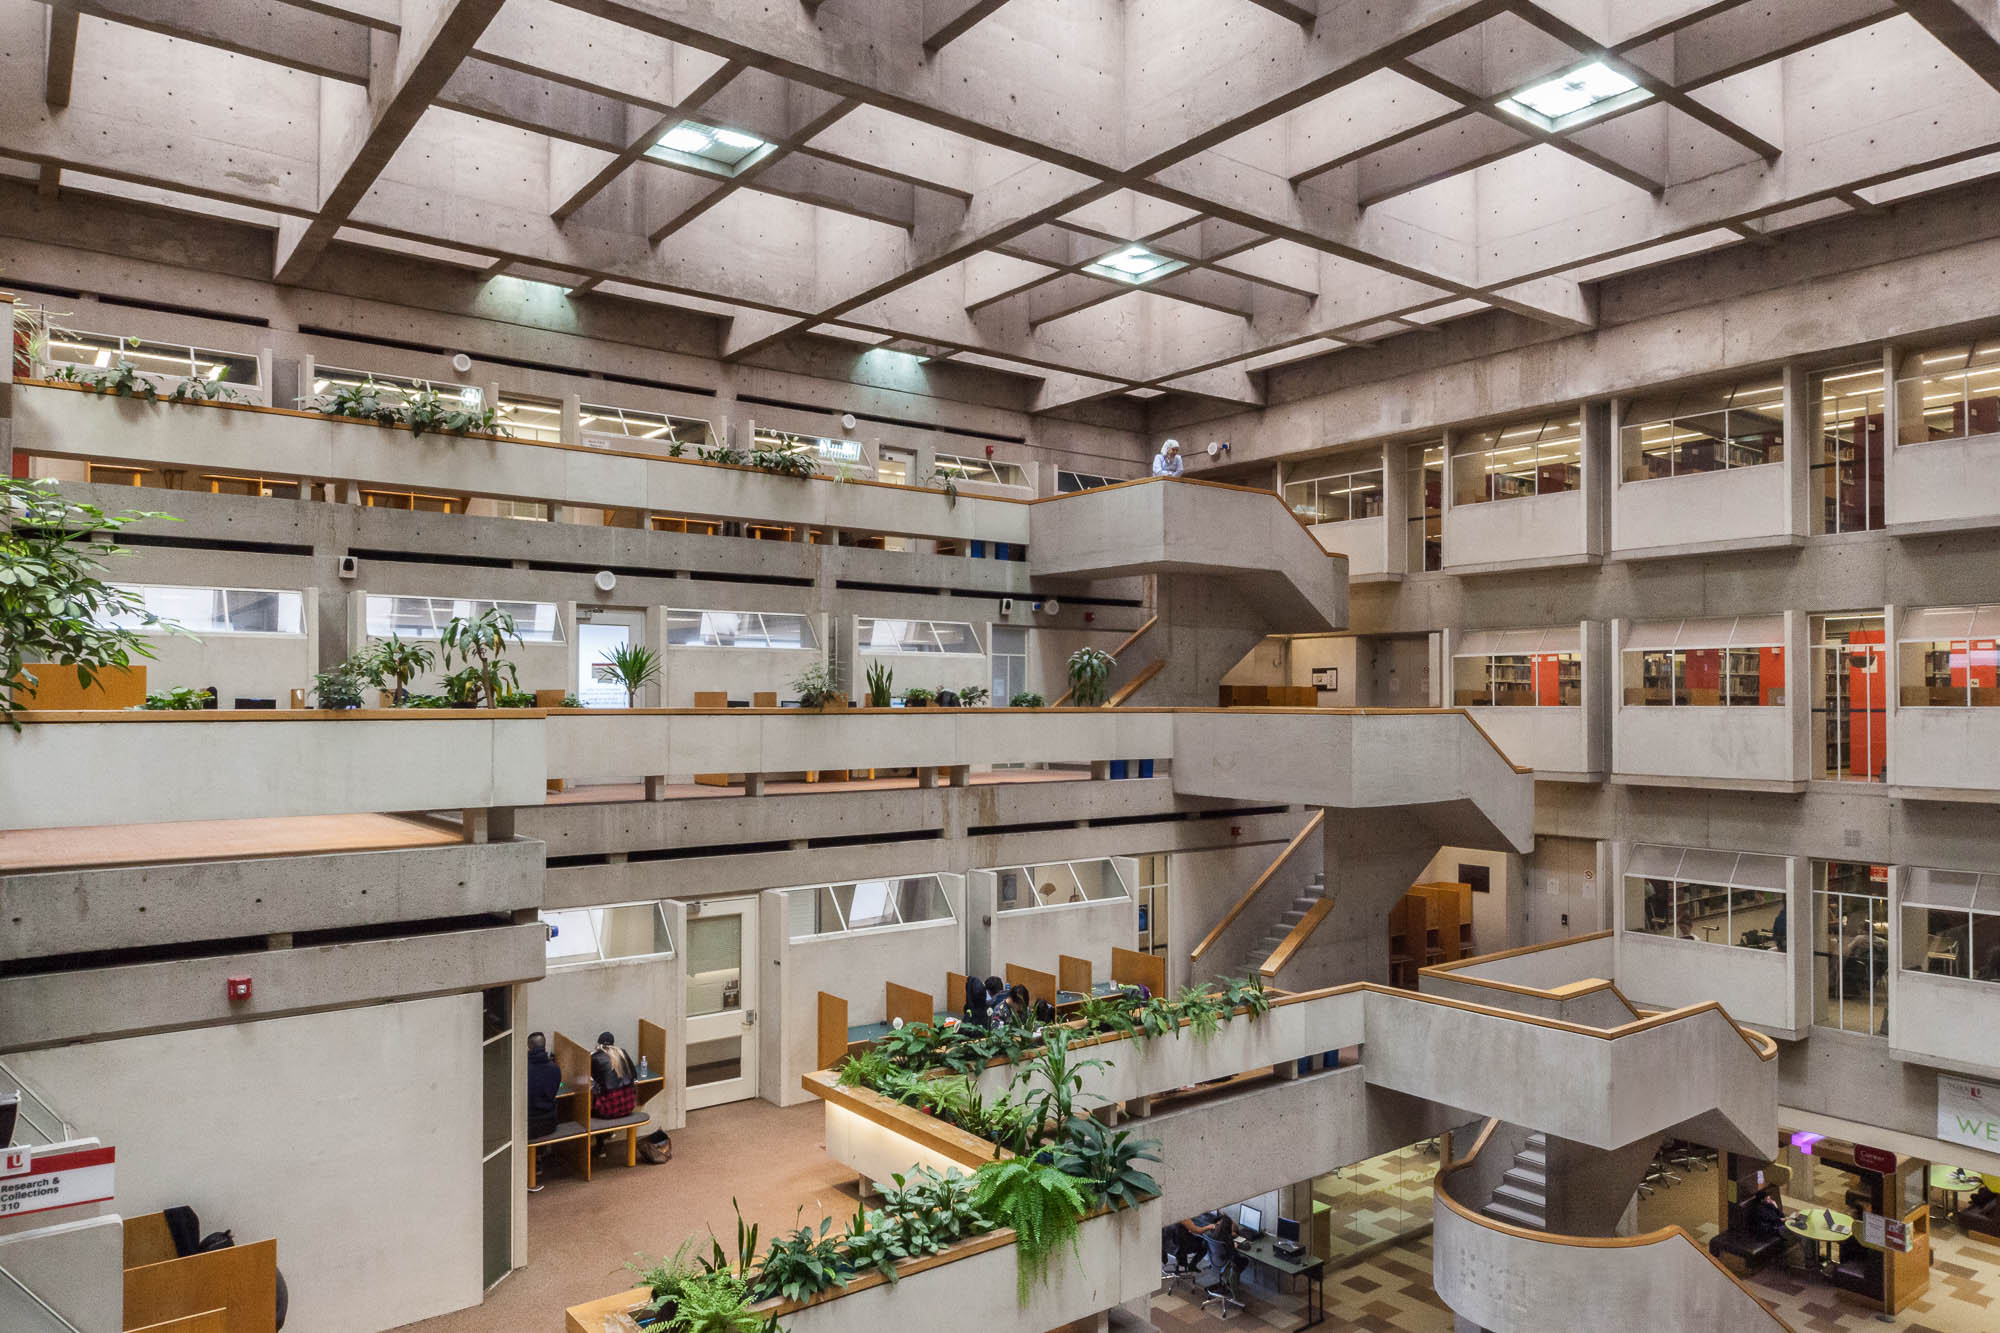 Interior of a brutalist library atrium, with cascading terraces lined with planters, in which lush green interior plants grow. Students are working at cubicles. Boxy staircases lead from one level to another. A person stands on top of the topmost staircase and looks at the atrium below.